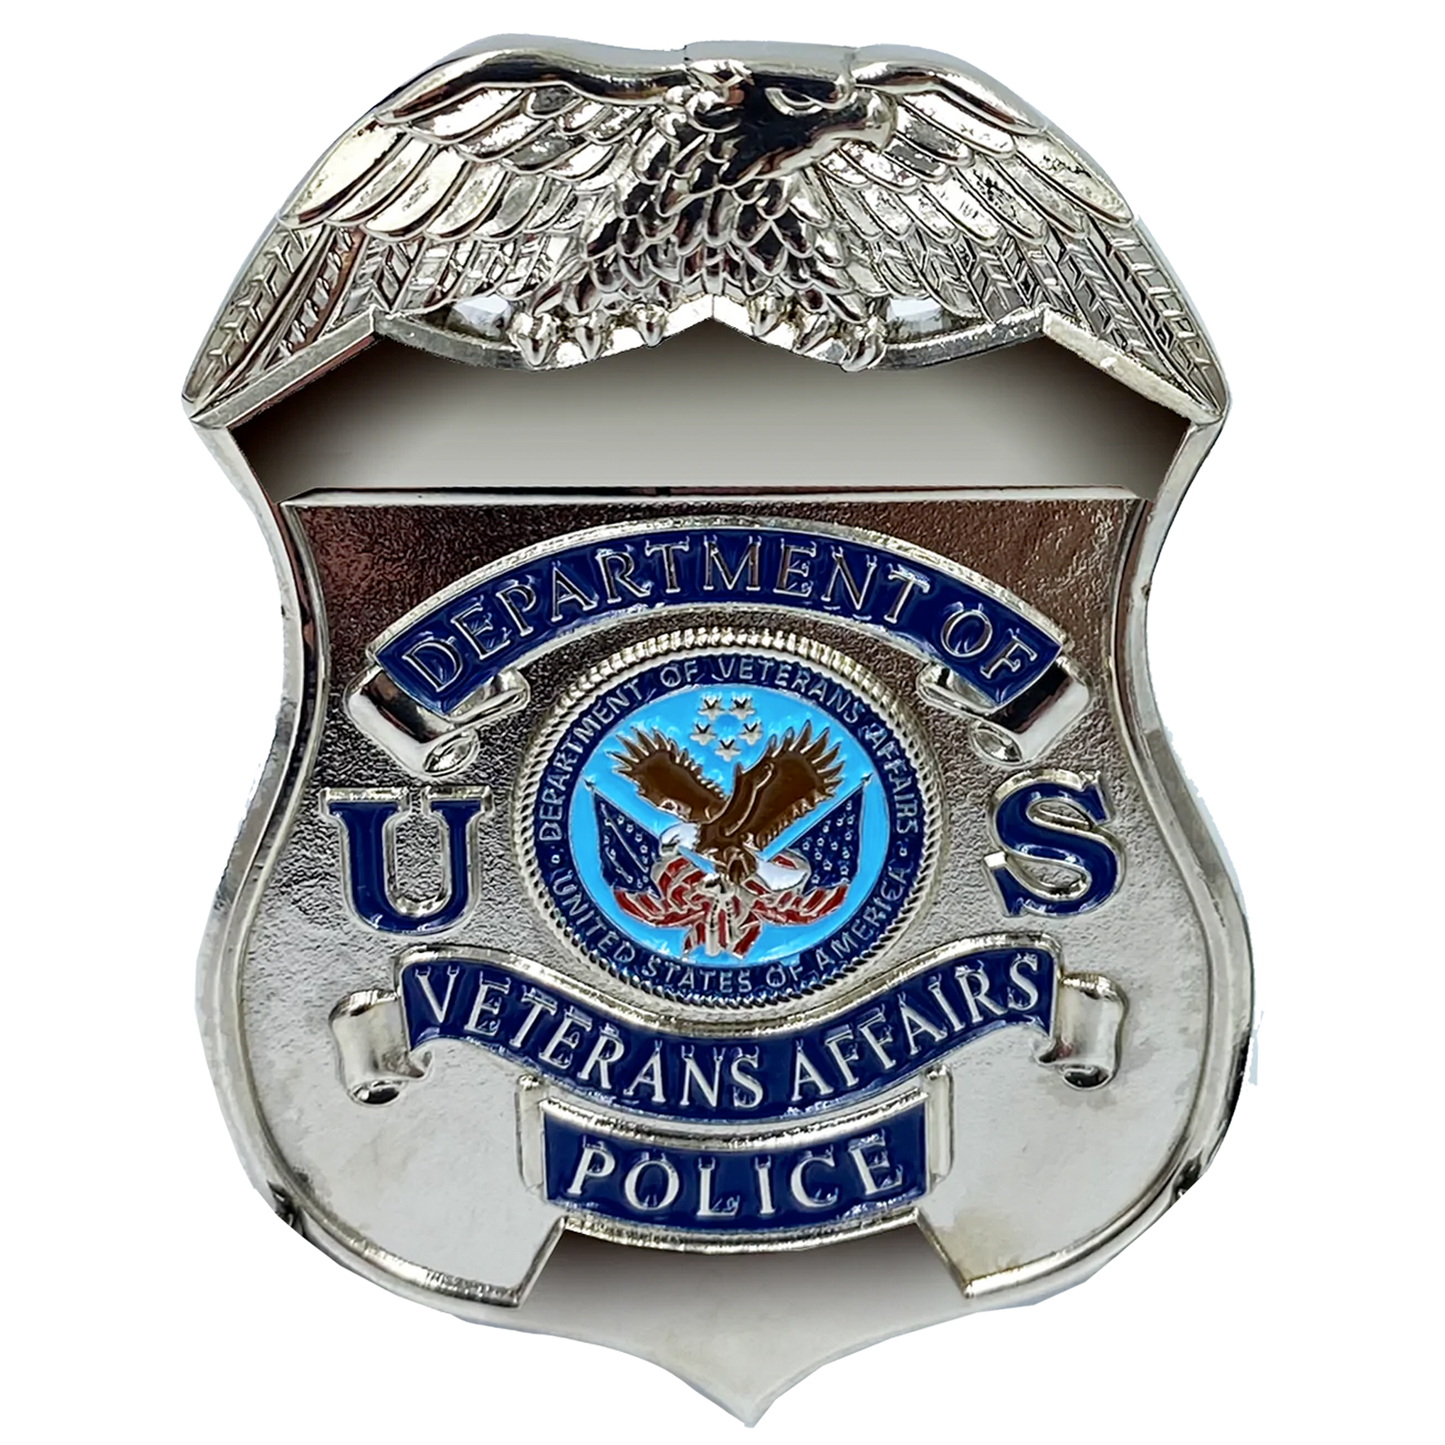 BL6-015 VA Veterans Affairs Administration lapel pin for Police Officer Detective